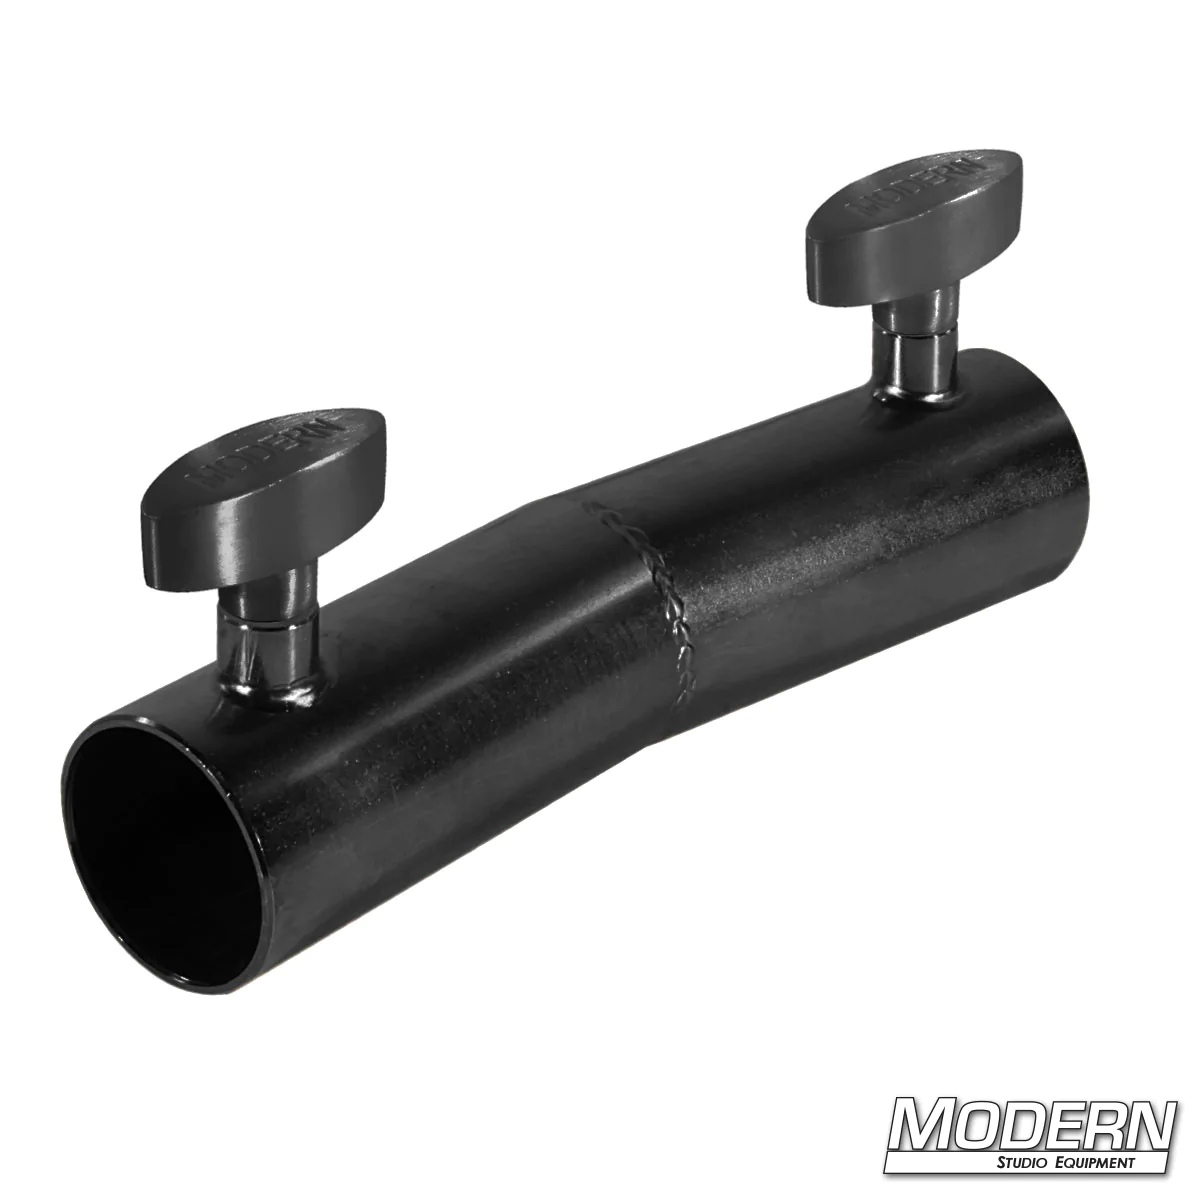 15° Sleeve for 1-1/4" - Black Zinc with T-Handles